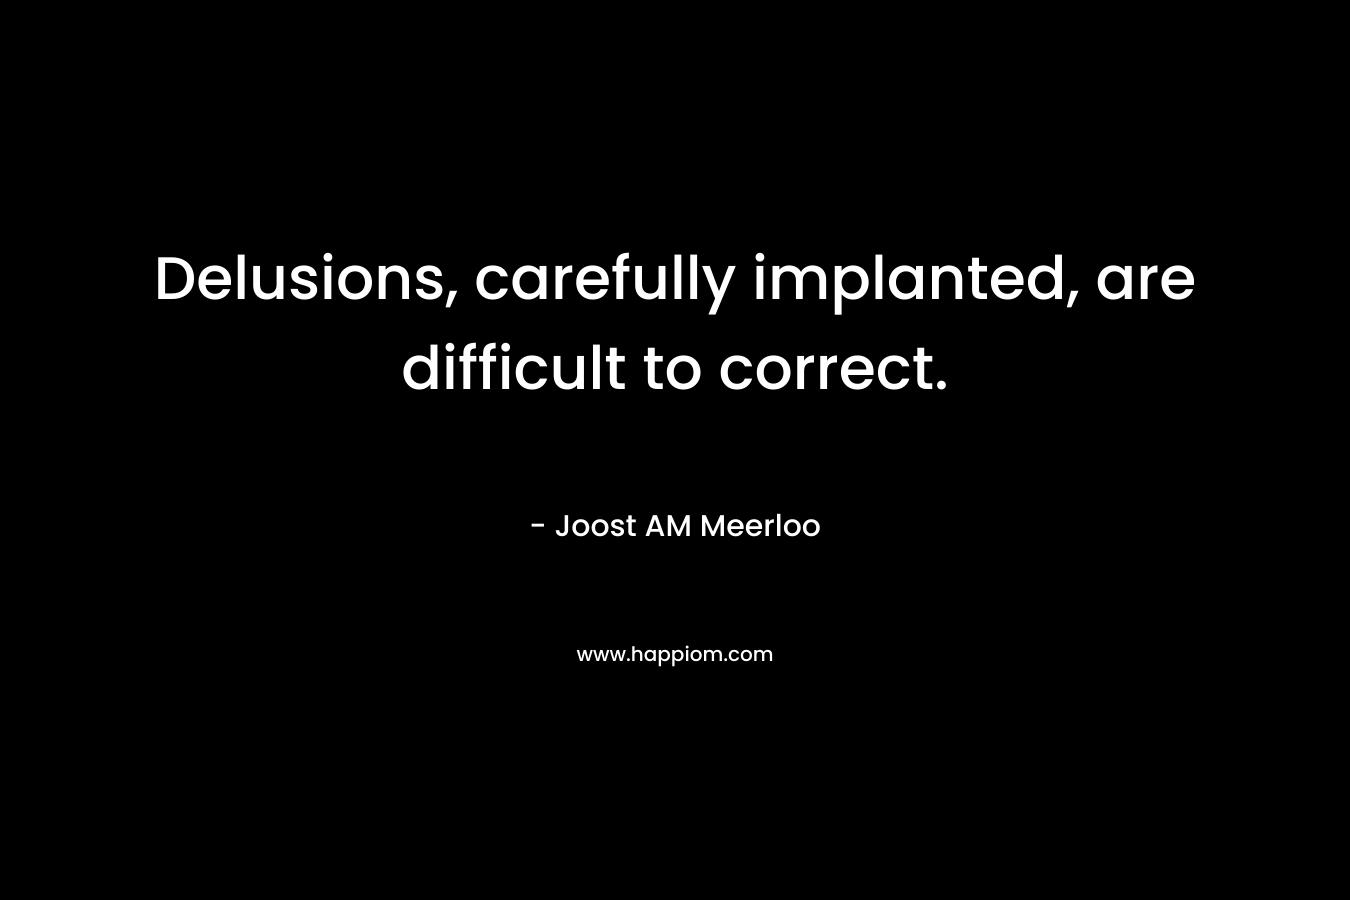 Delusions, carefully implanted, are difficult to correct. – Joost AM Meerloo